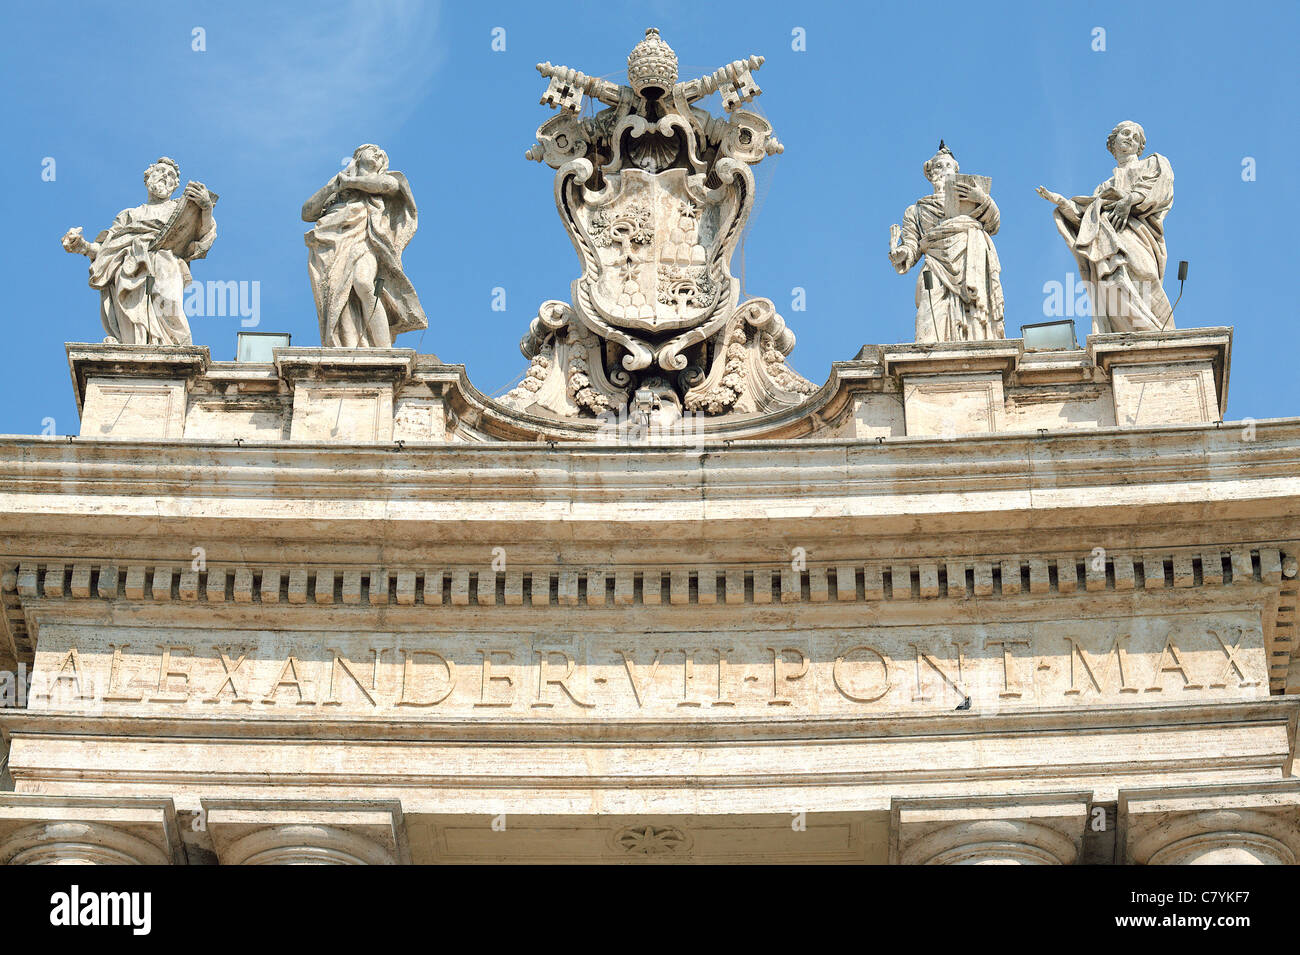 Part of Bernini s Colonnade with Statues of Saints Piazza San Pietro Saint Peter s Square Rome Italy Stock Photo